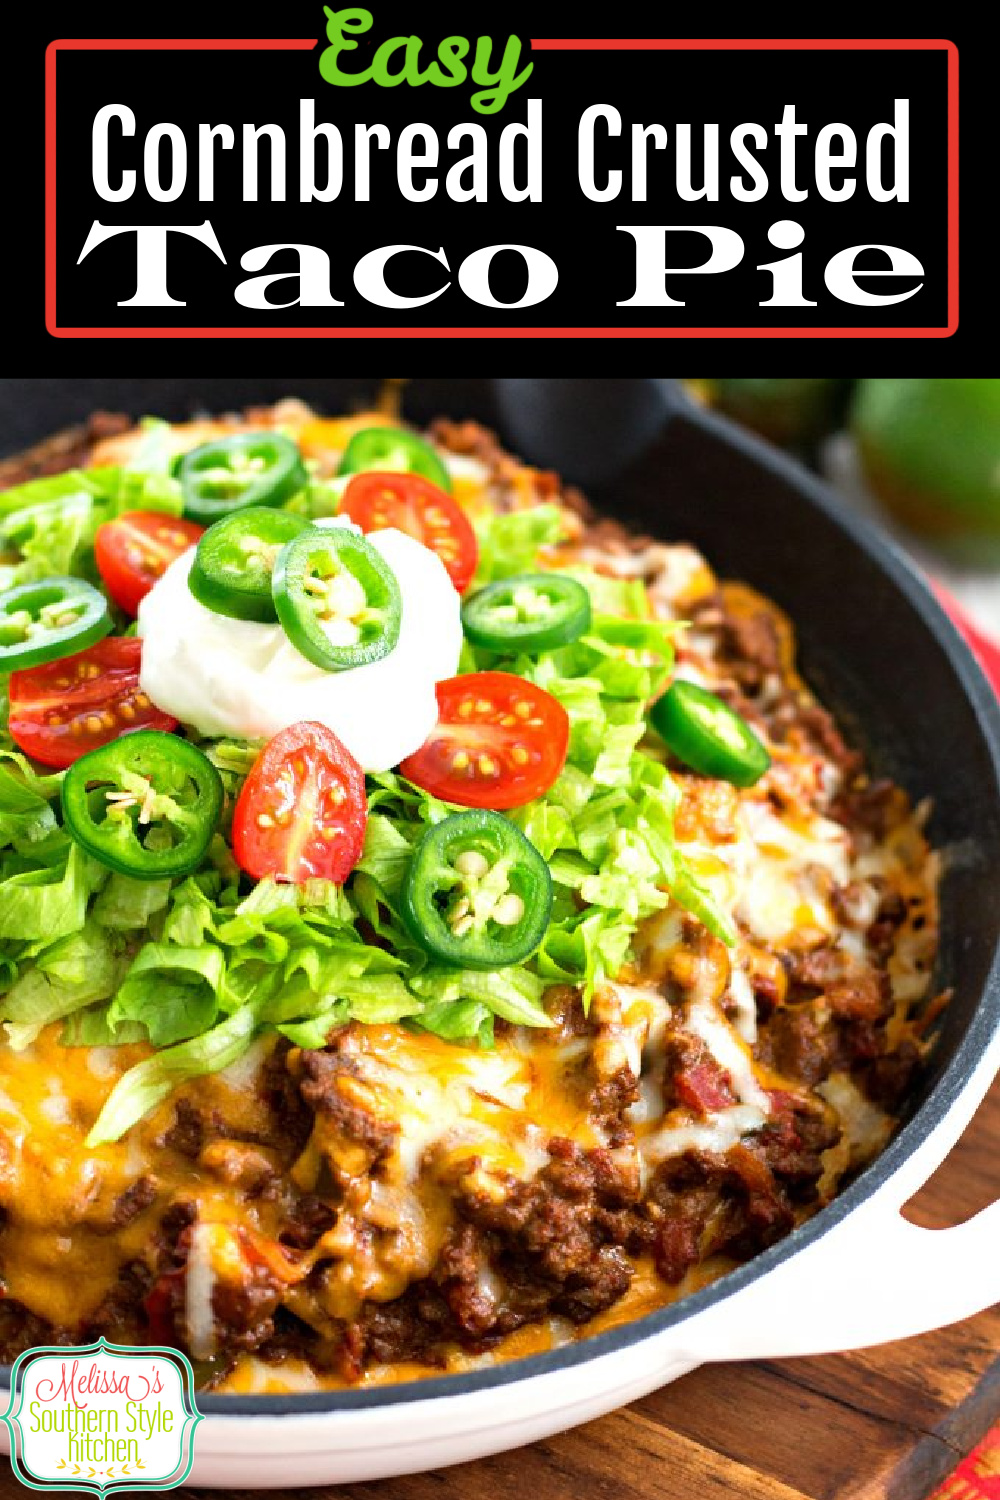 Create your own homestyle fiesta with this Easy Corn Bread Crusted Taco Pie for dinner tonight #tacopie #cornbread #mexicanfood #tacos #southernrecipes #tacorecipes #easygroundbeefrecipes #tacotuesday#southernfood via @melissasssk